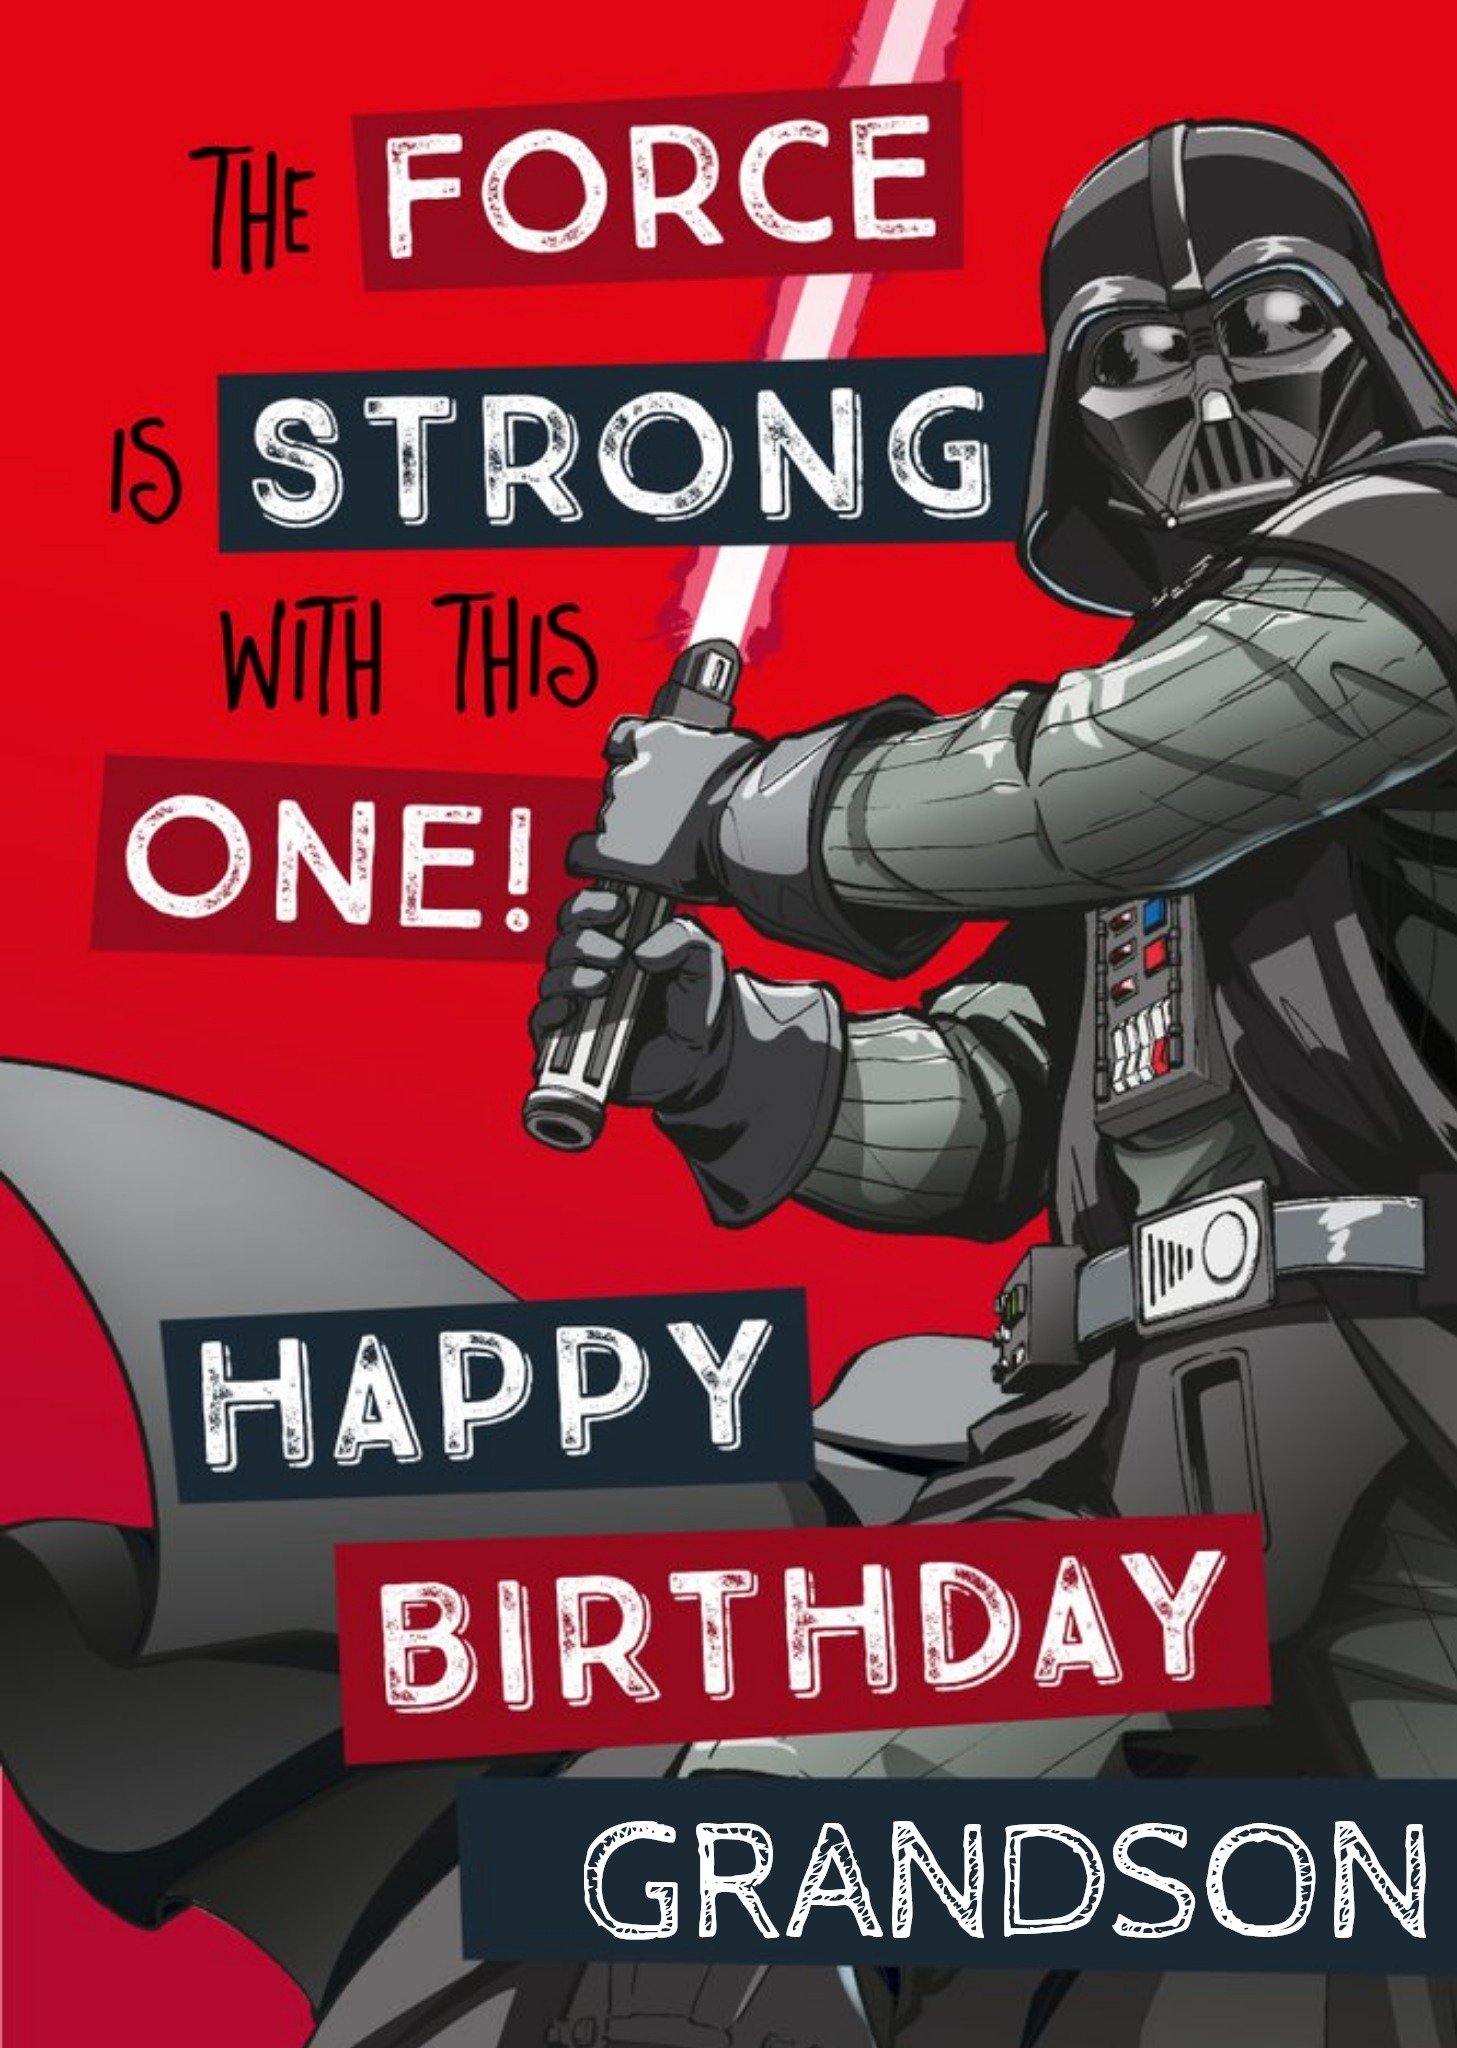 Disney Star Wars Grandson Birthday Card - Darth Vader - The Force Is Strong, Large